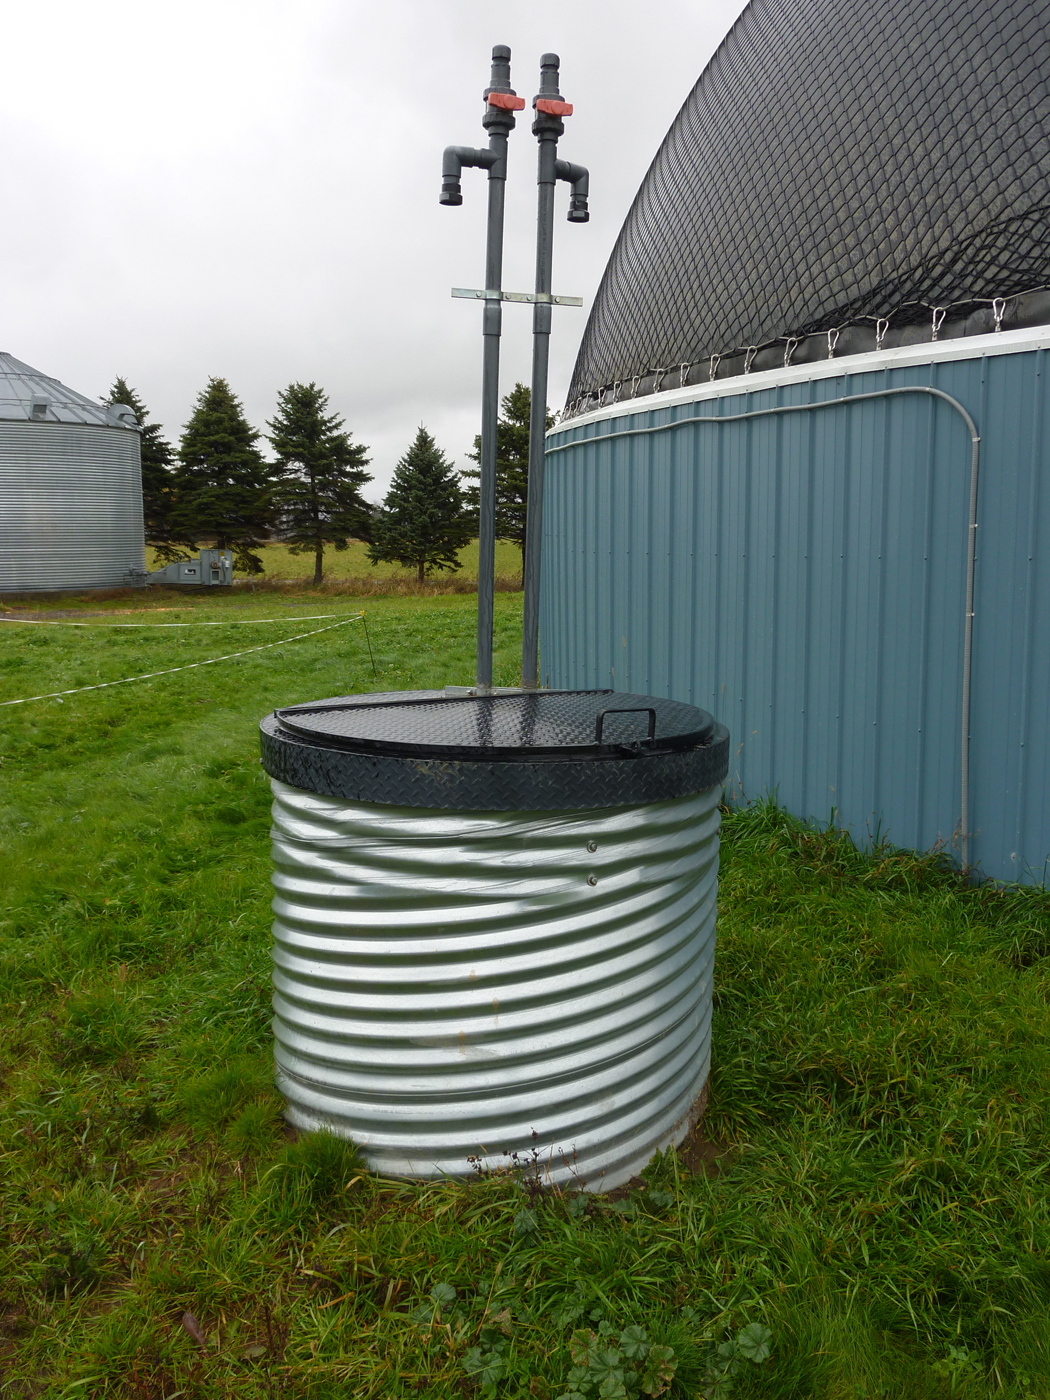 The access point to the condensation well where the moisture removed from the biogas is collected.